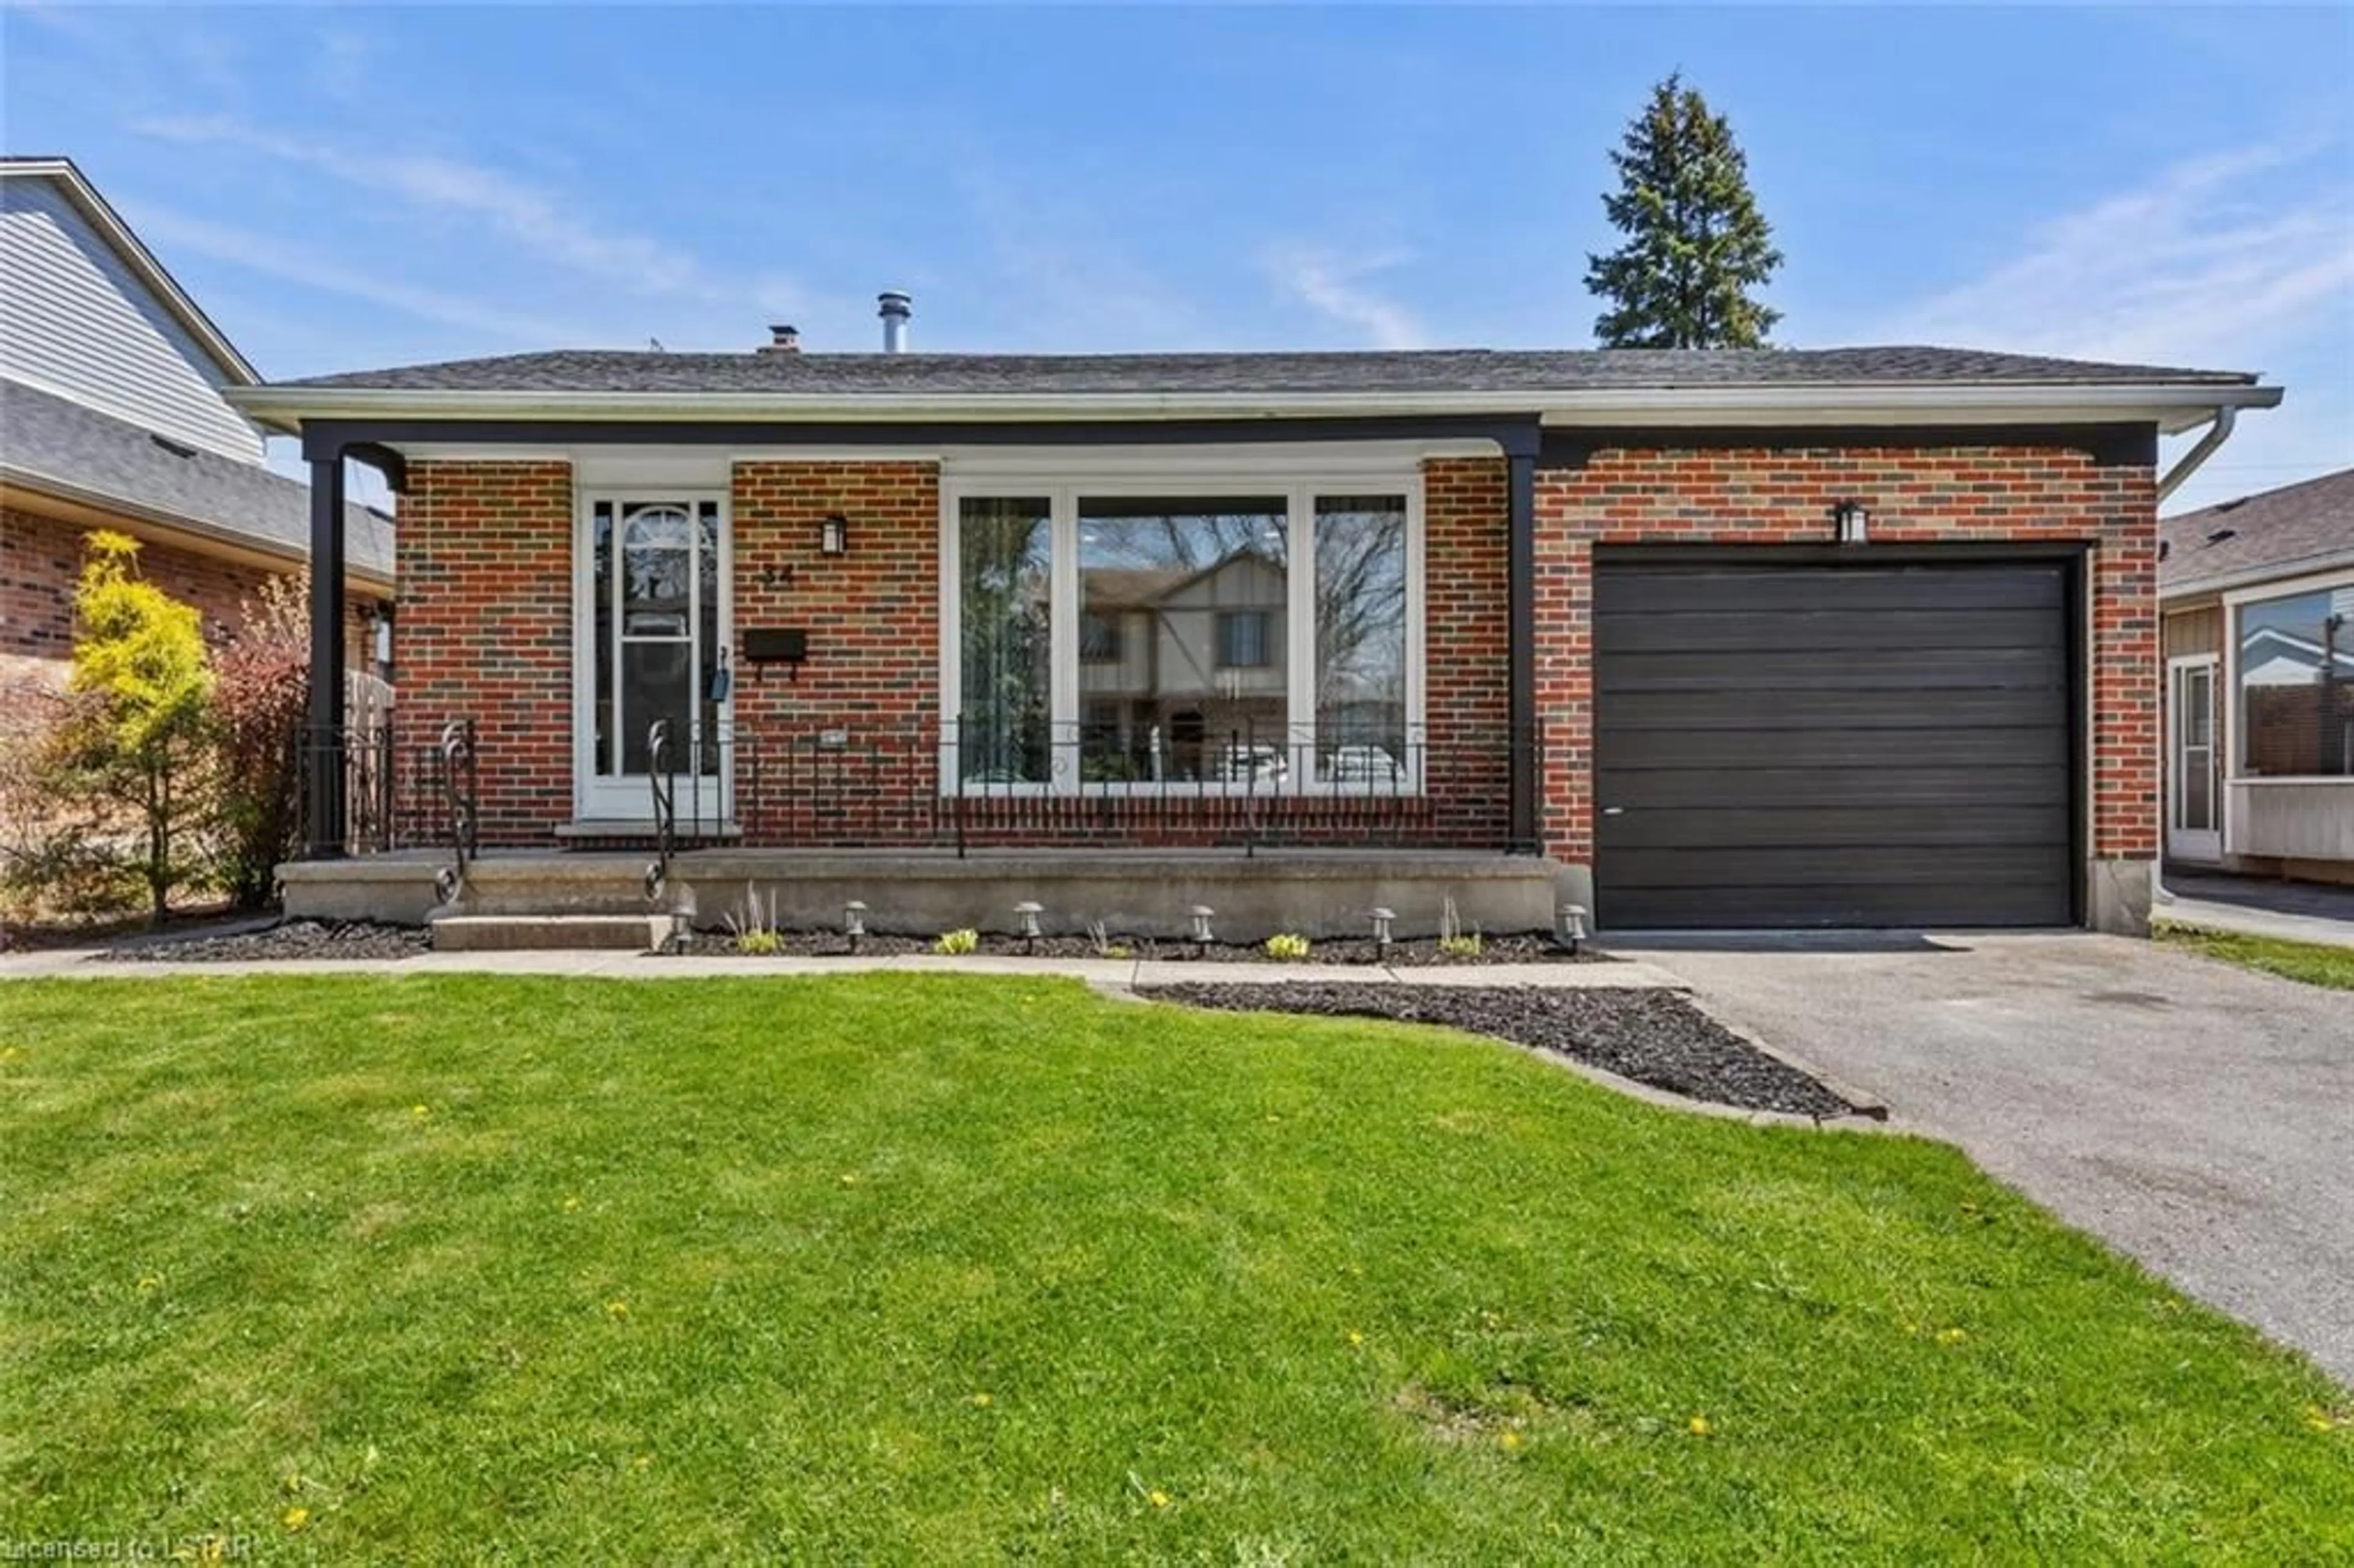 Home with brick exterior material for 34 Lochern Rd, London Ontario N5Z 4L6